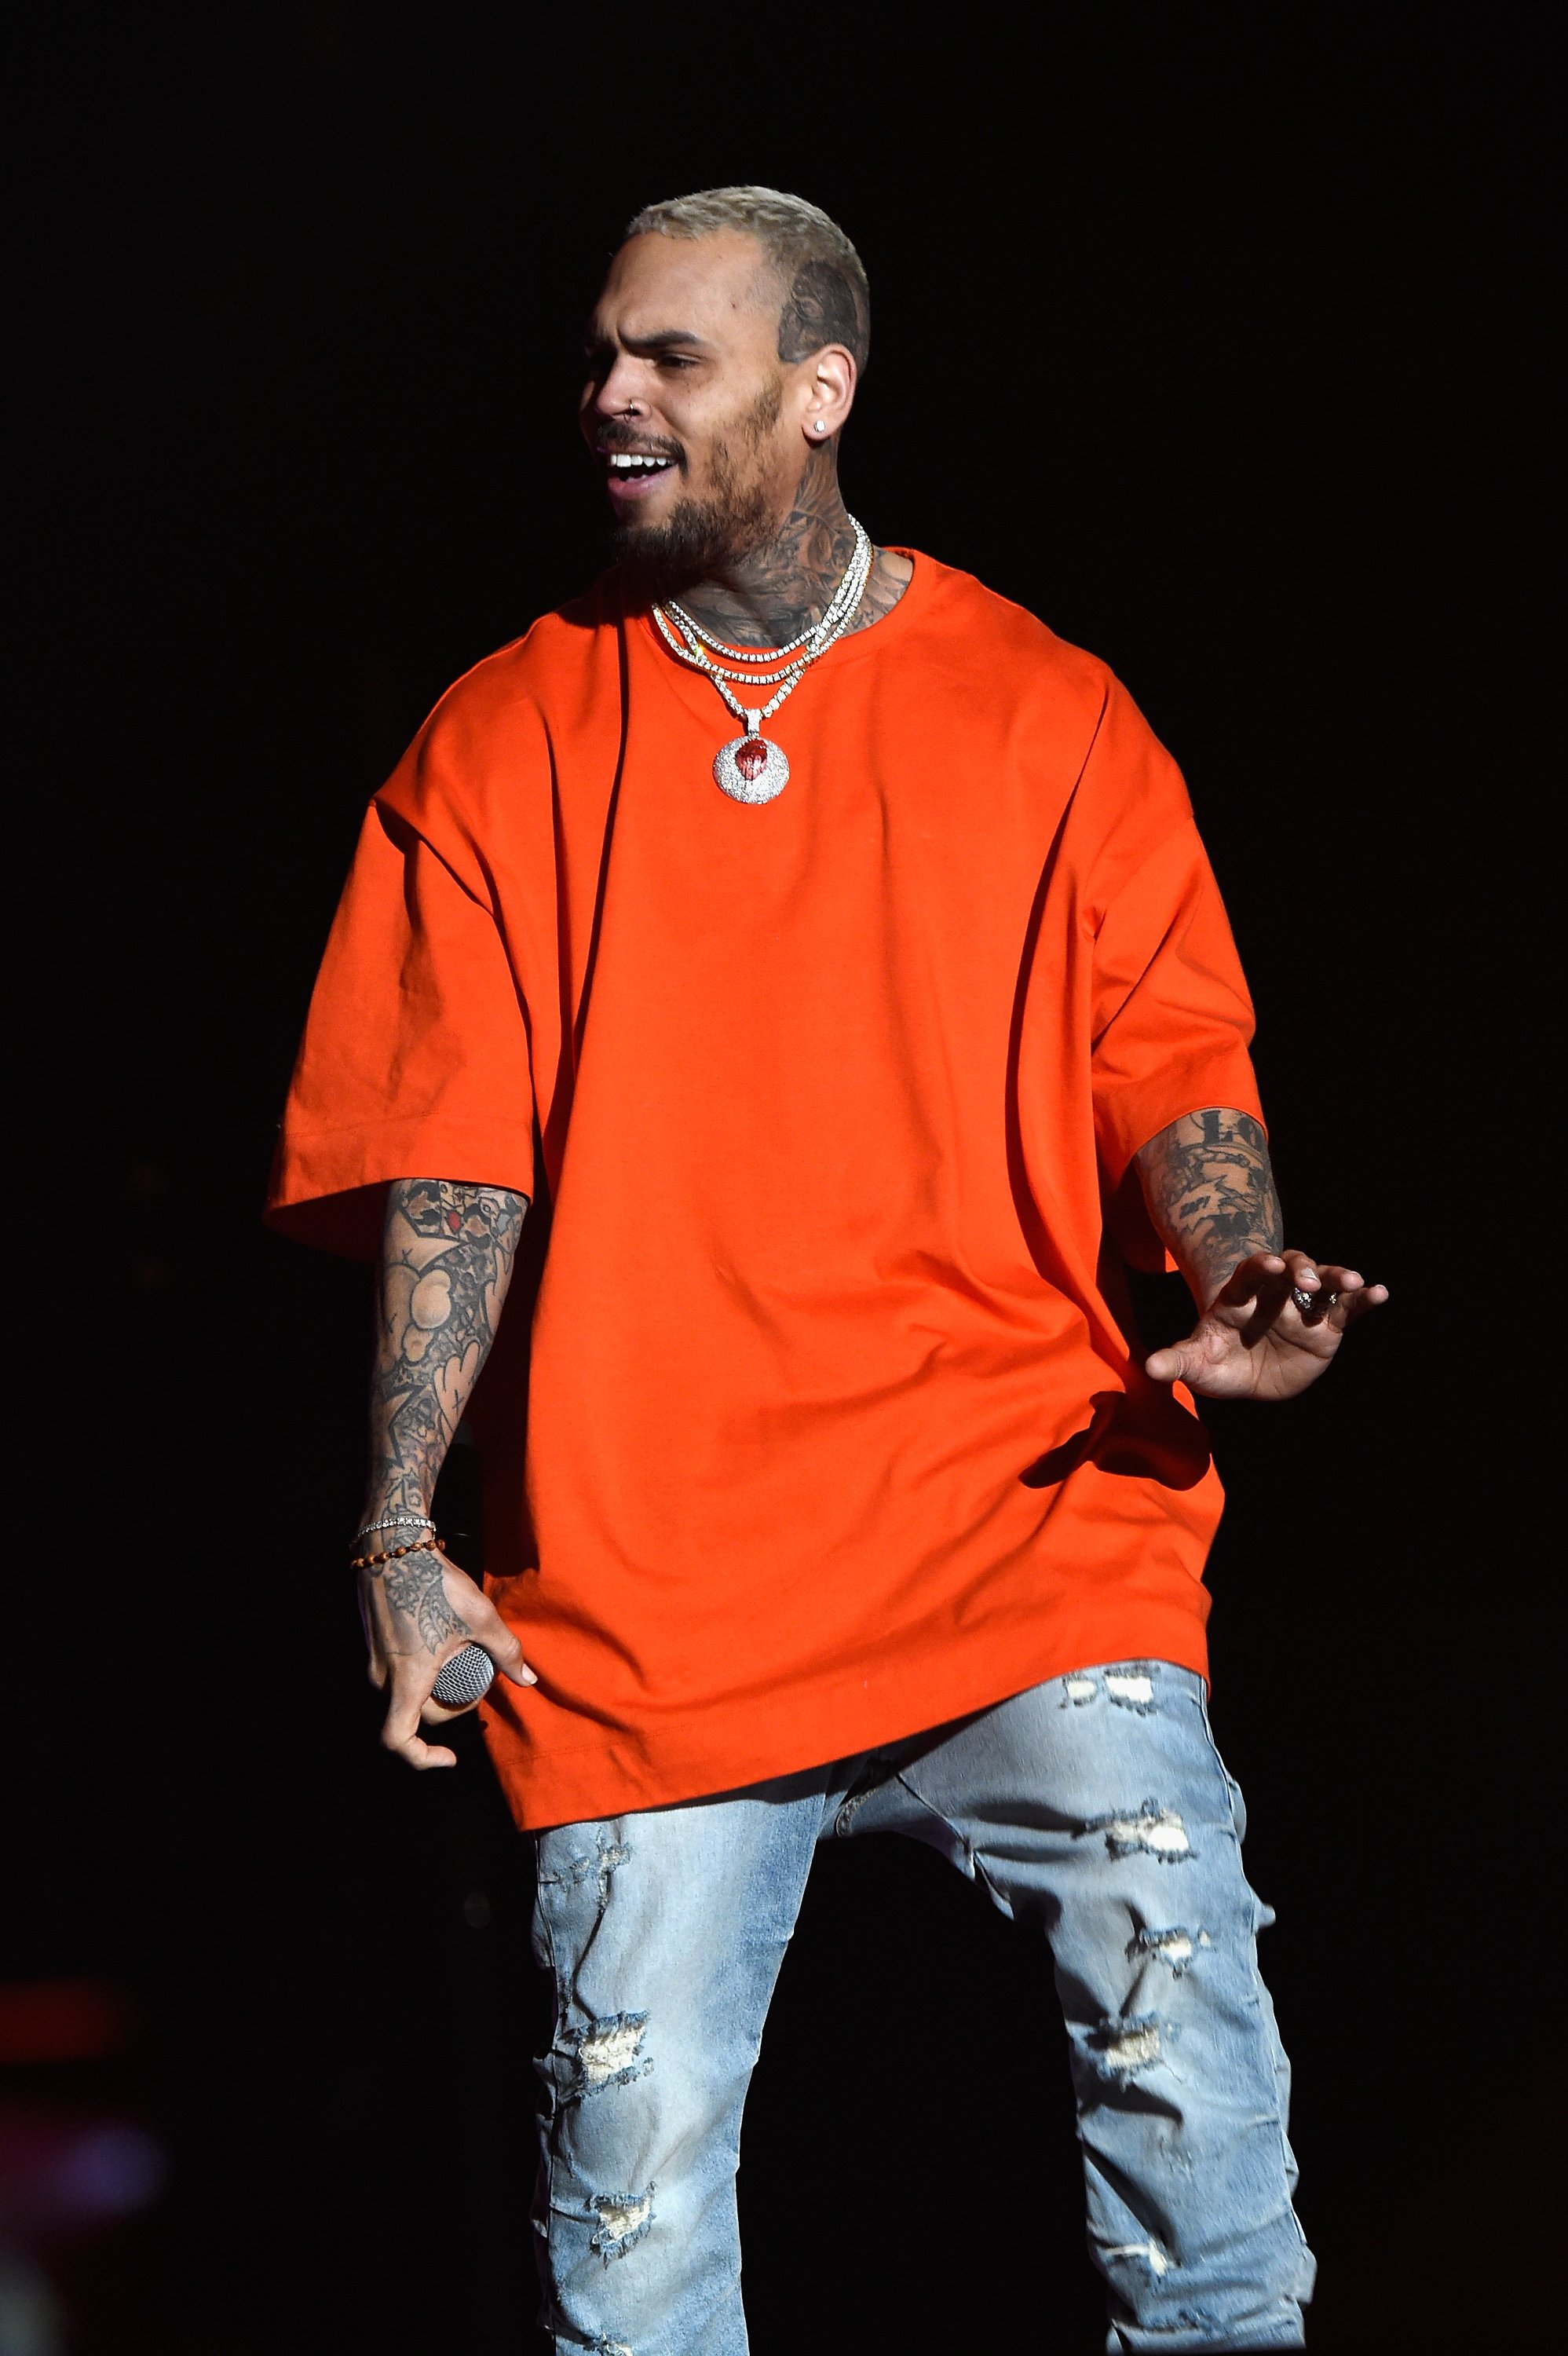 Chris Brown performs during Demi Lovato "Tell Me You Love Me" World Tour on March 2, 2018 in California | Photo: Getty Images